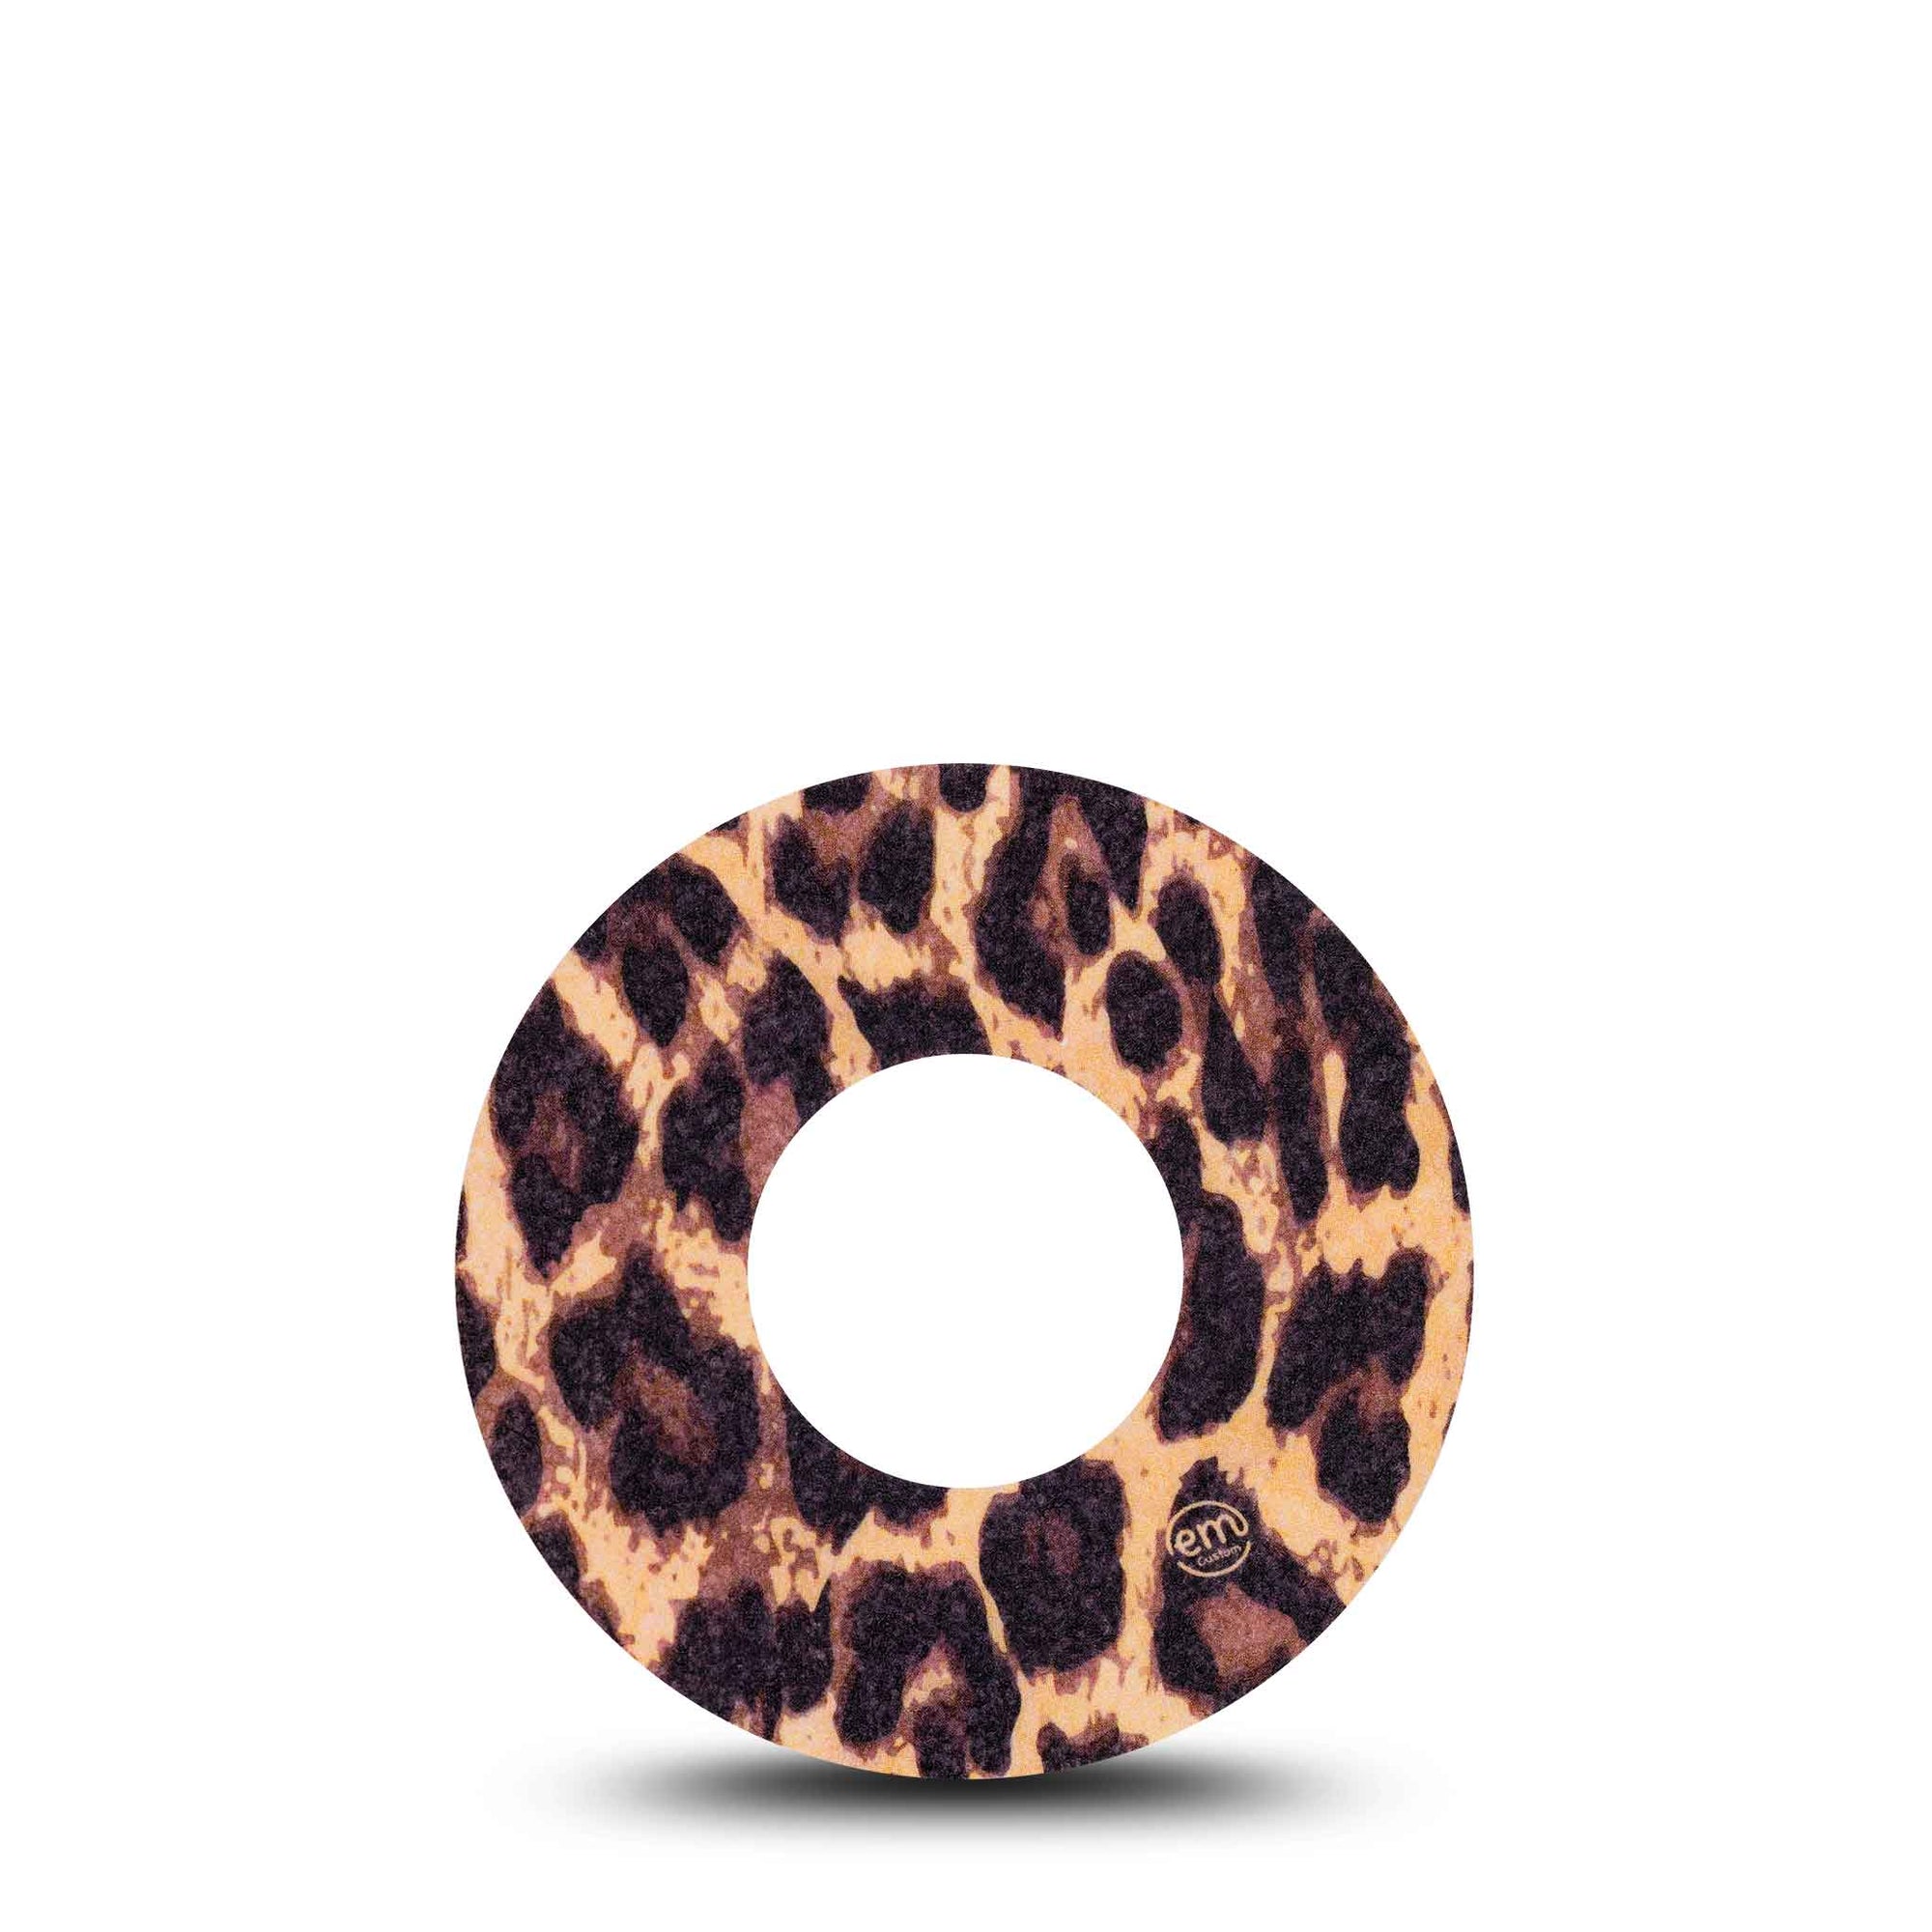 ExpressionMed Leopard Print Freestyle Libre CMG Single Tape ExpressionMed